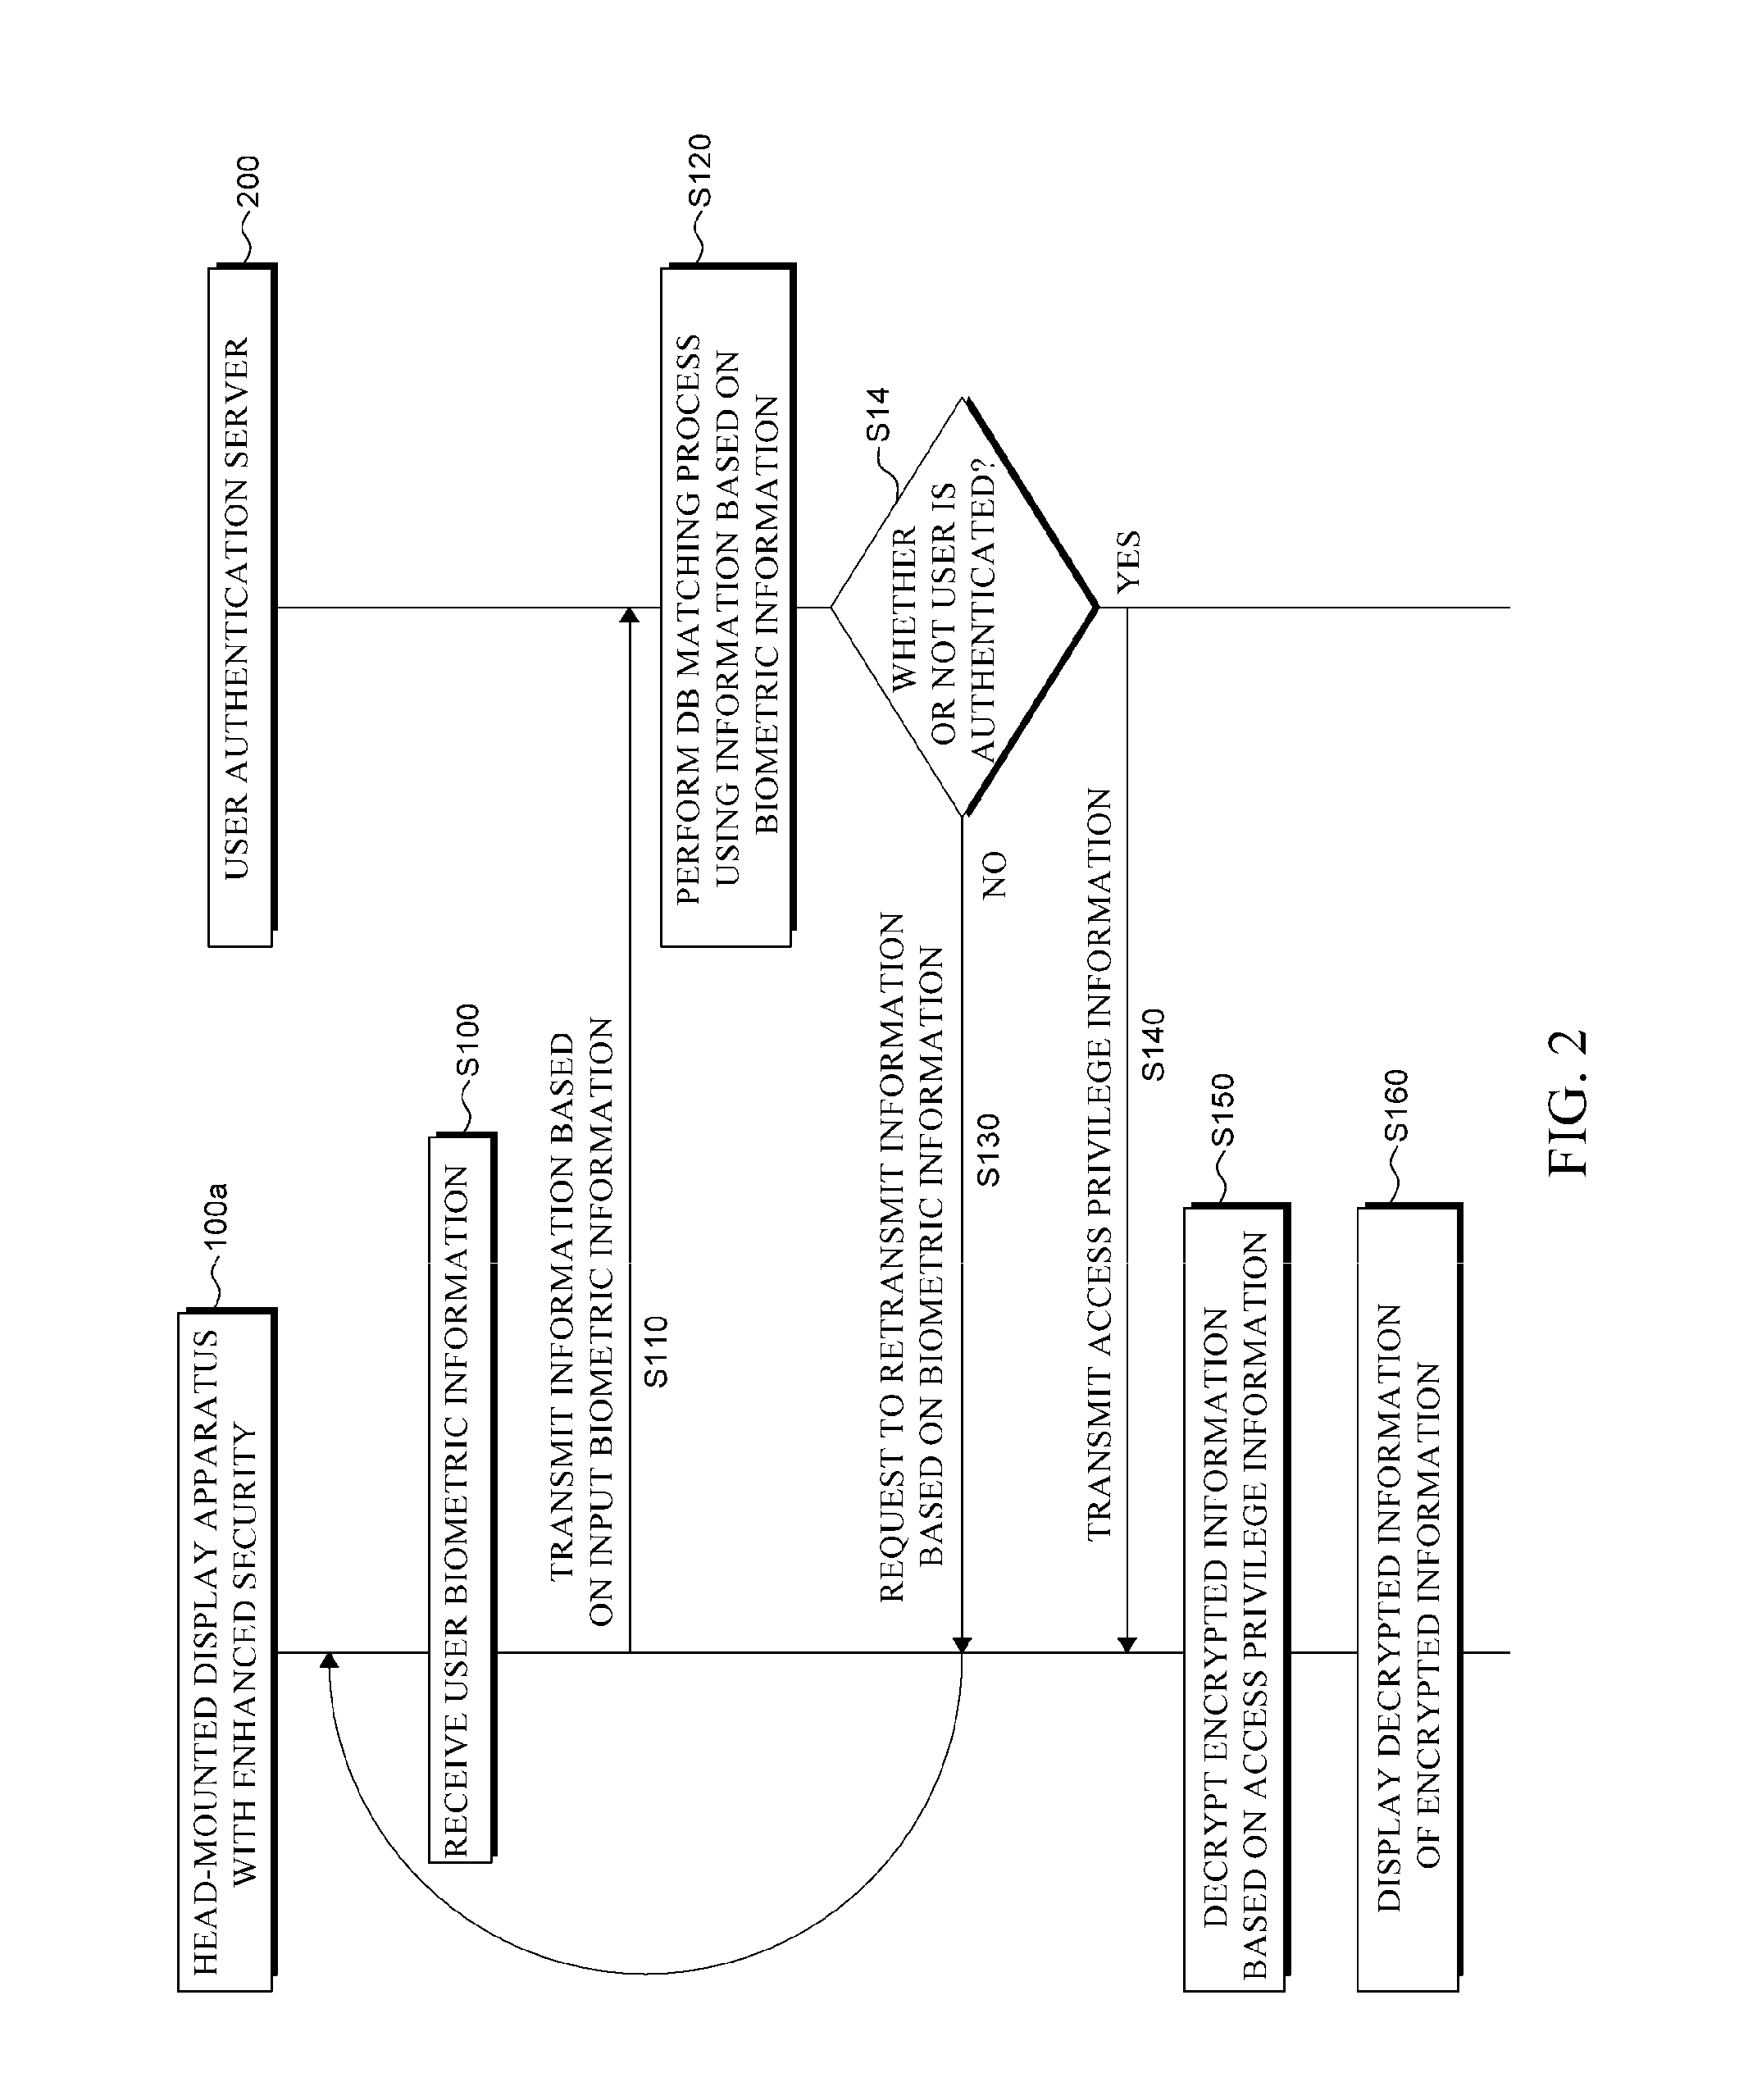 Head-mounted display apparatus with enhanced security and method for accessing encrypted information by the apparatus